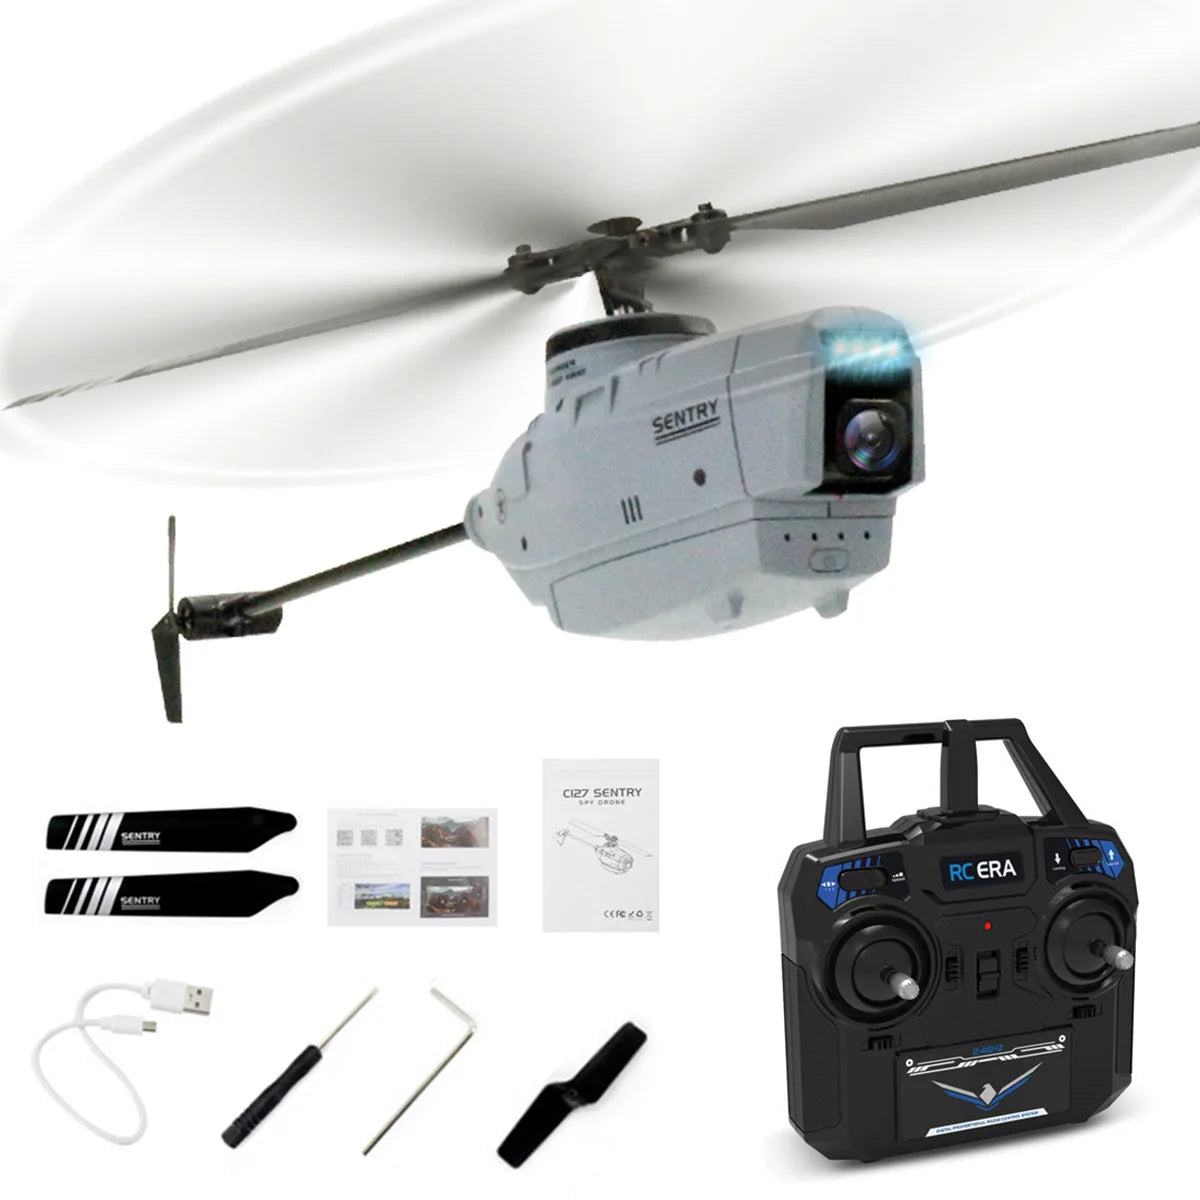 C127 2.4G RC Helicopter, the flybarless drone toy comes with a 720P wide-angle camera 